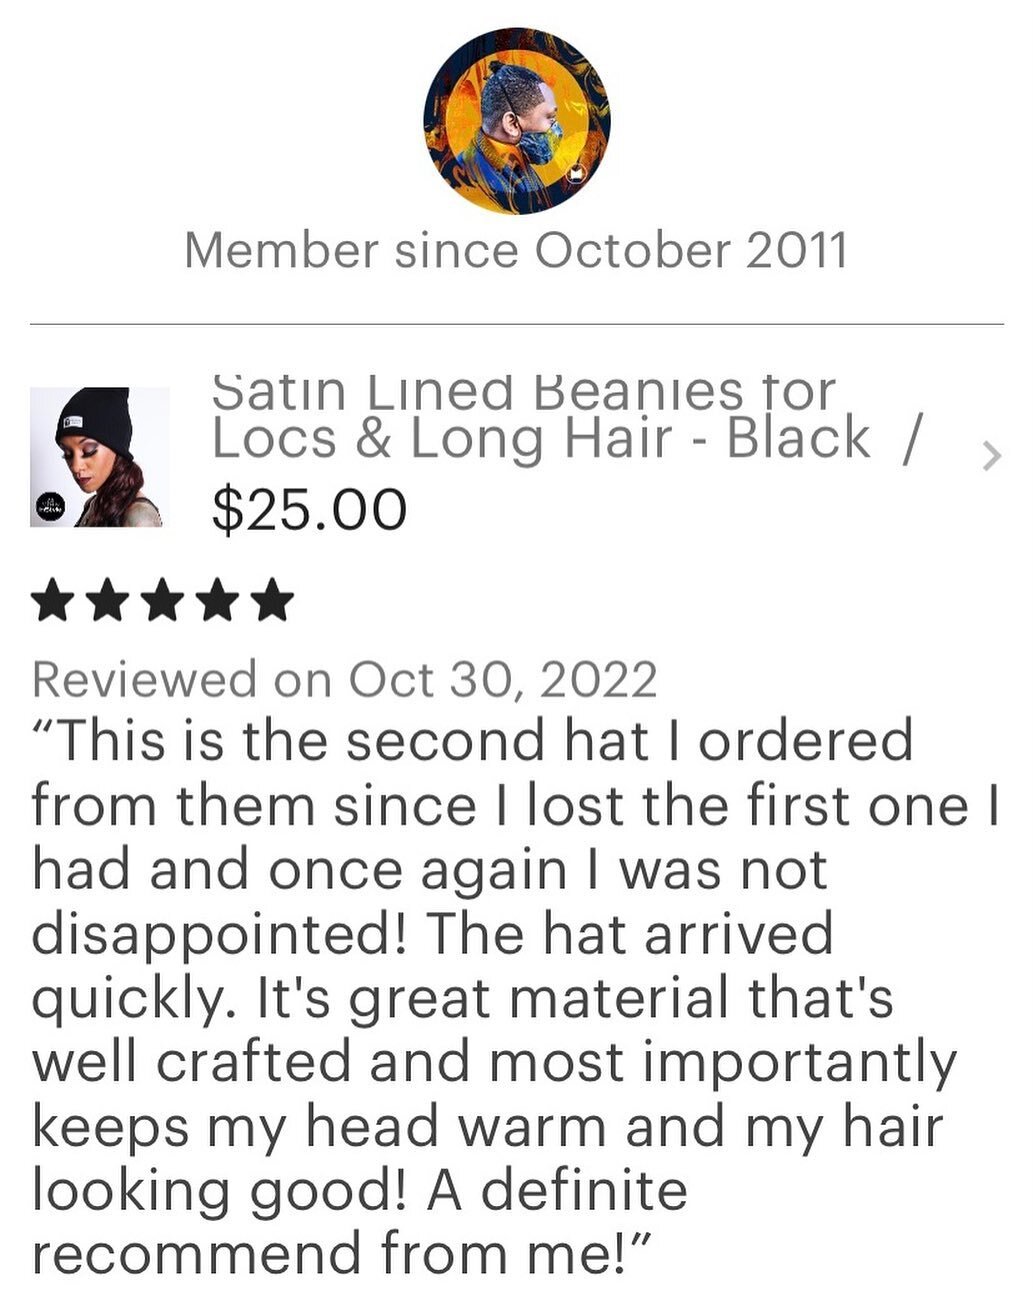 Shout out to Gregory for your 5 Star review at our TheodoreVernell Shop on #etsy 
 

https://www.etsy.com/shop/TheodoreVernellShop

#beaniehat #beaniehatmurah #customersatisfaction #beanie #customerexperience #locs #locmaintenance #longdreads #longlo